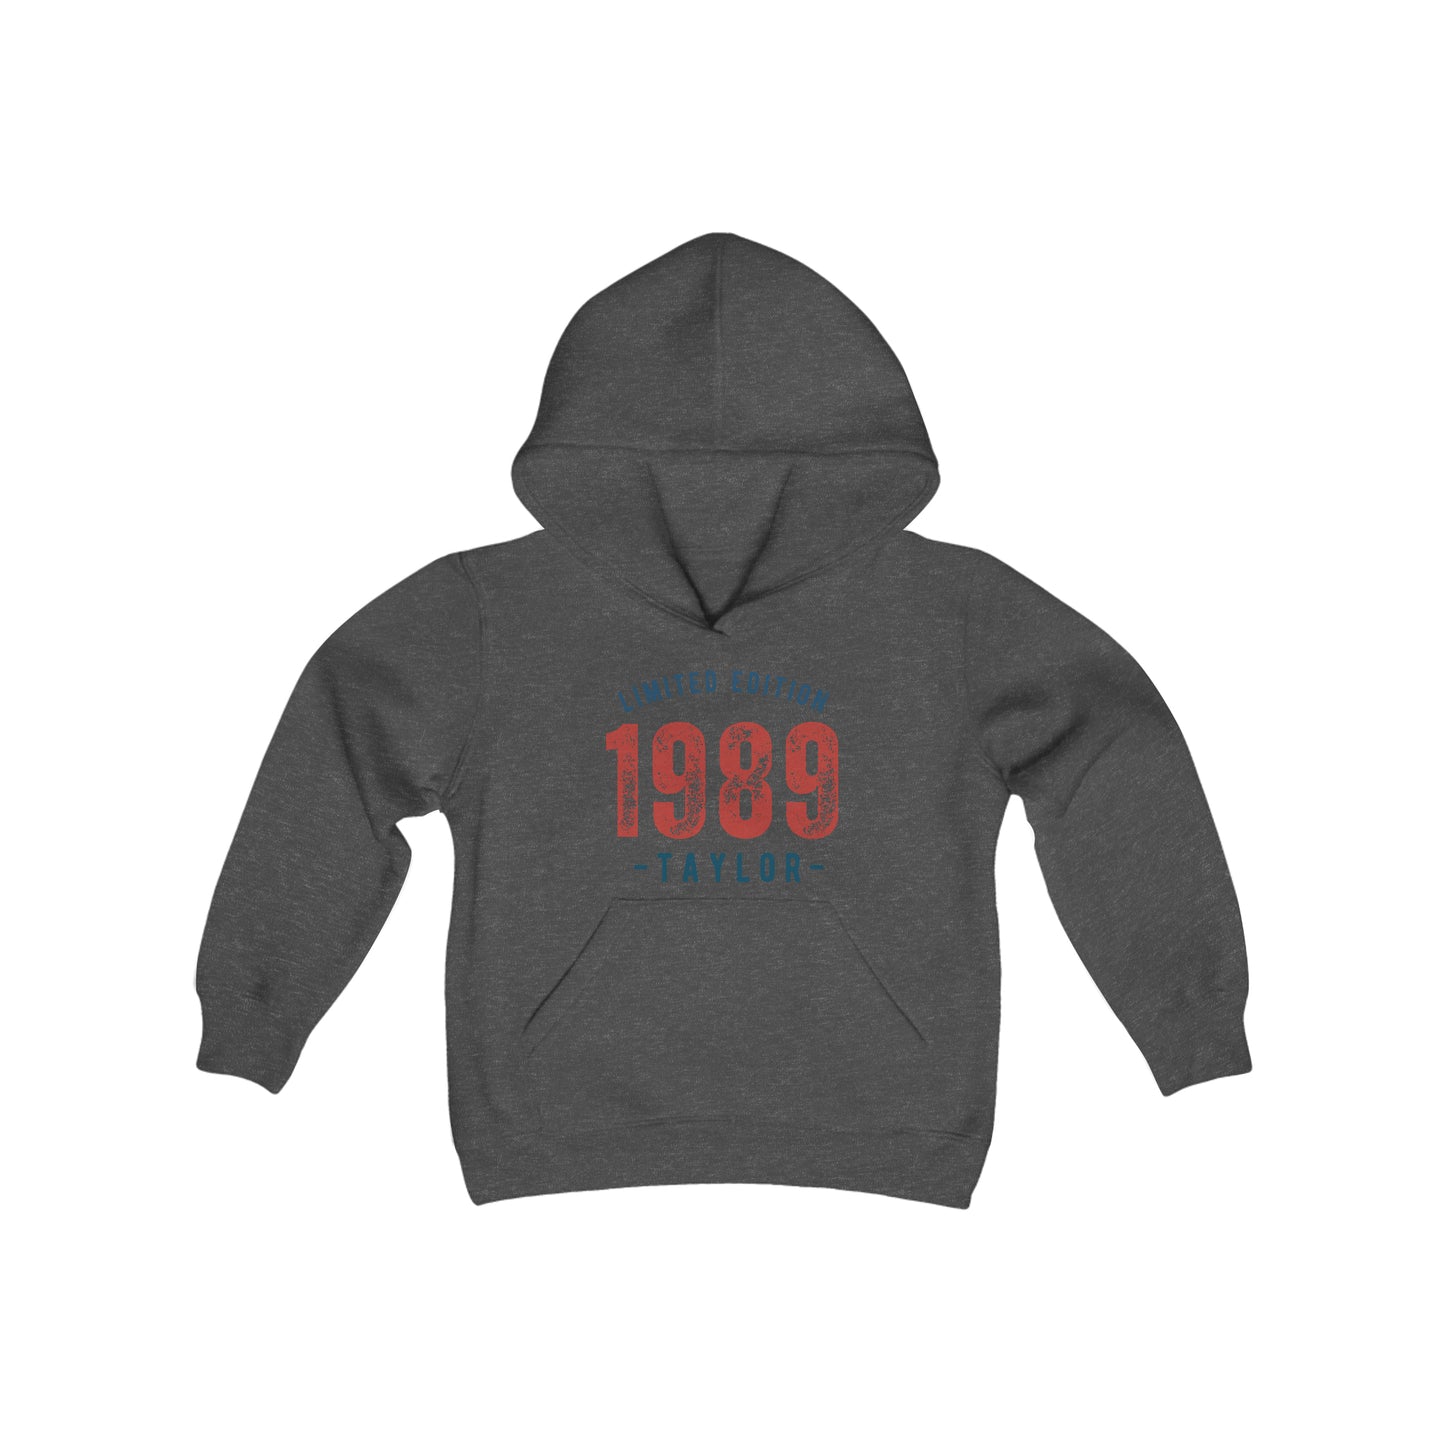 Taylor Swift 1989 Limited Edition Youth Hooded Sweatshirt